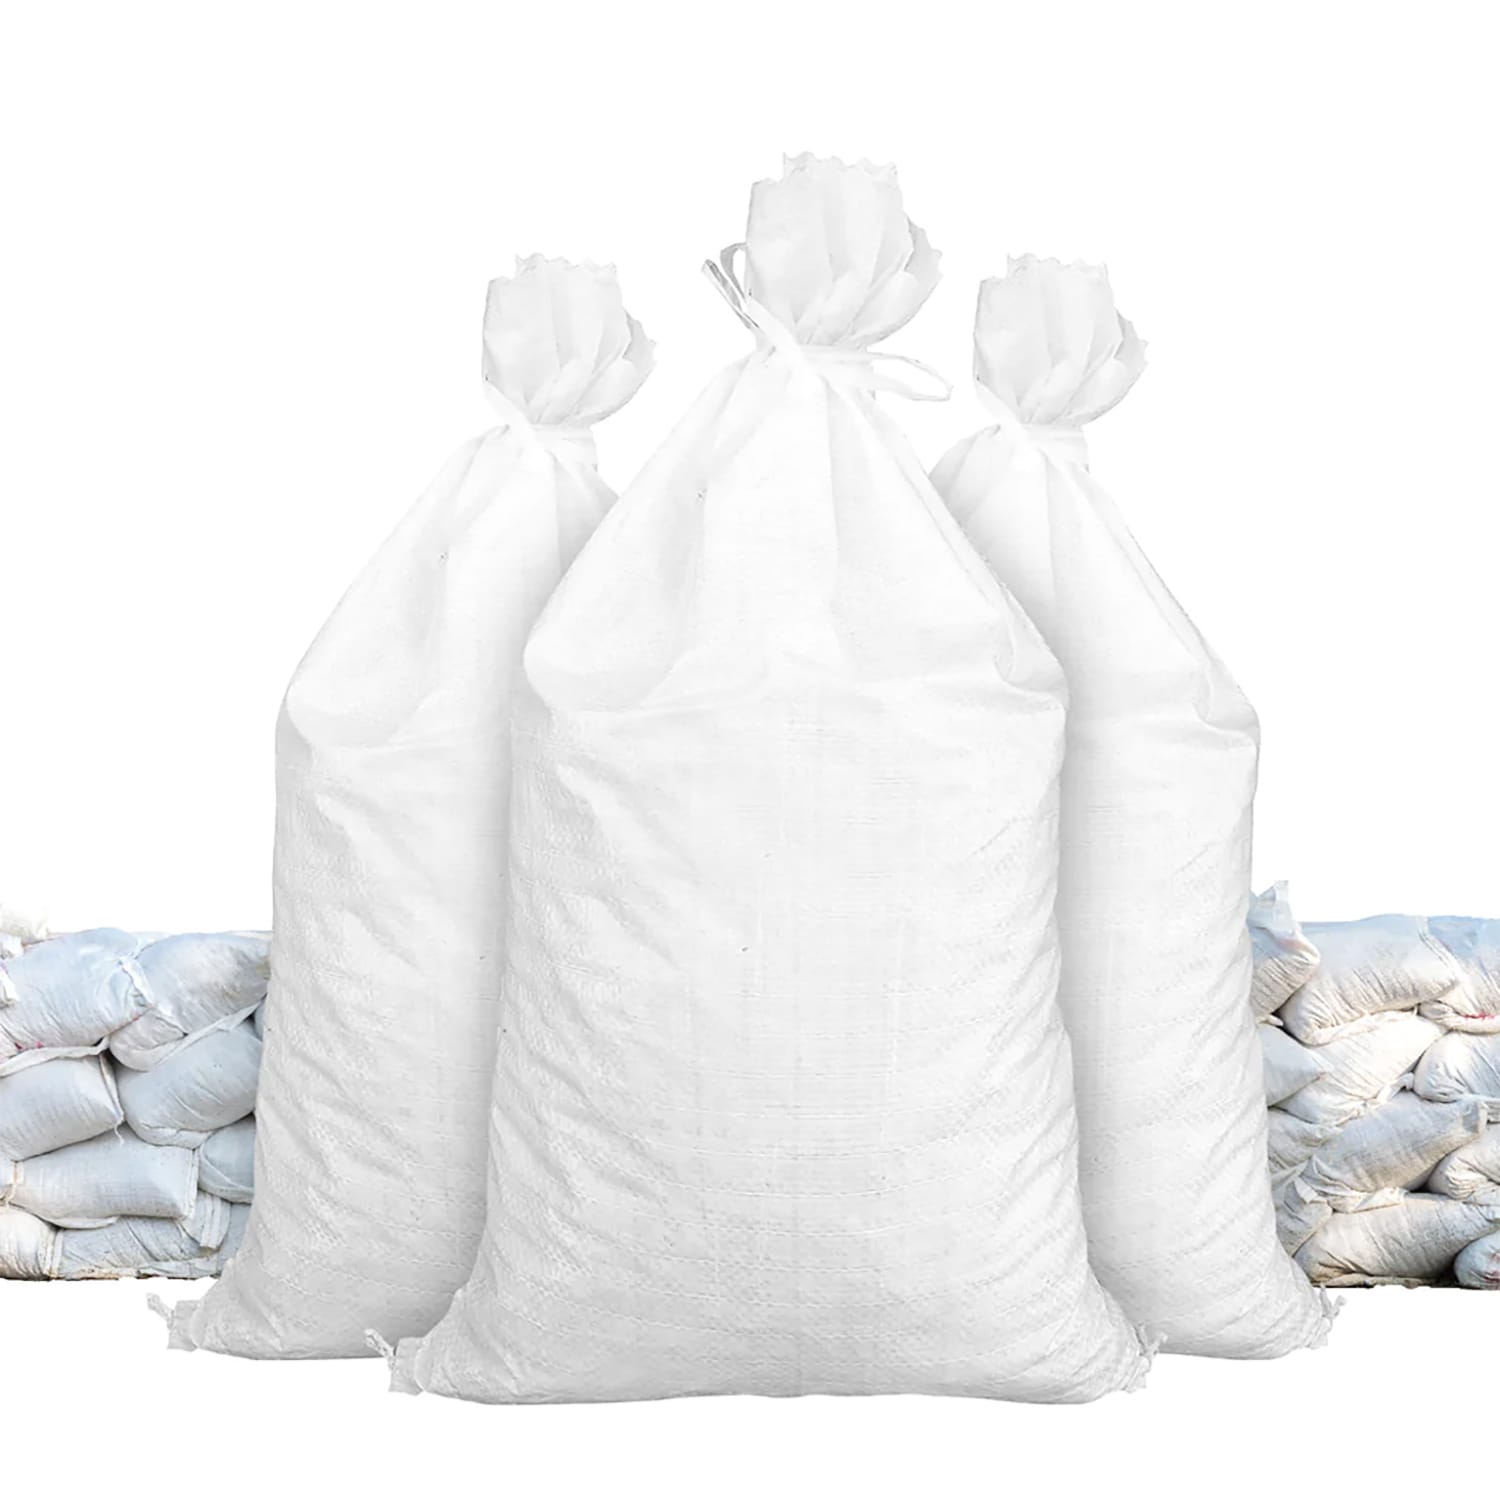 14 x 26 TerraRight Sandbags 50 Count UV Protection Max Extra Durable Empty White Woven Polypropylene Sand Bags w/Ties 